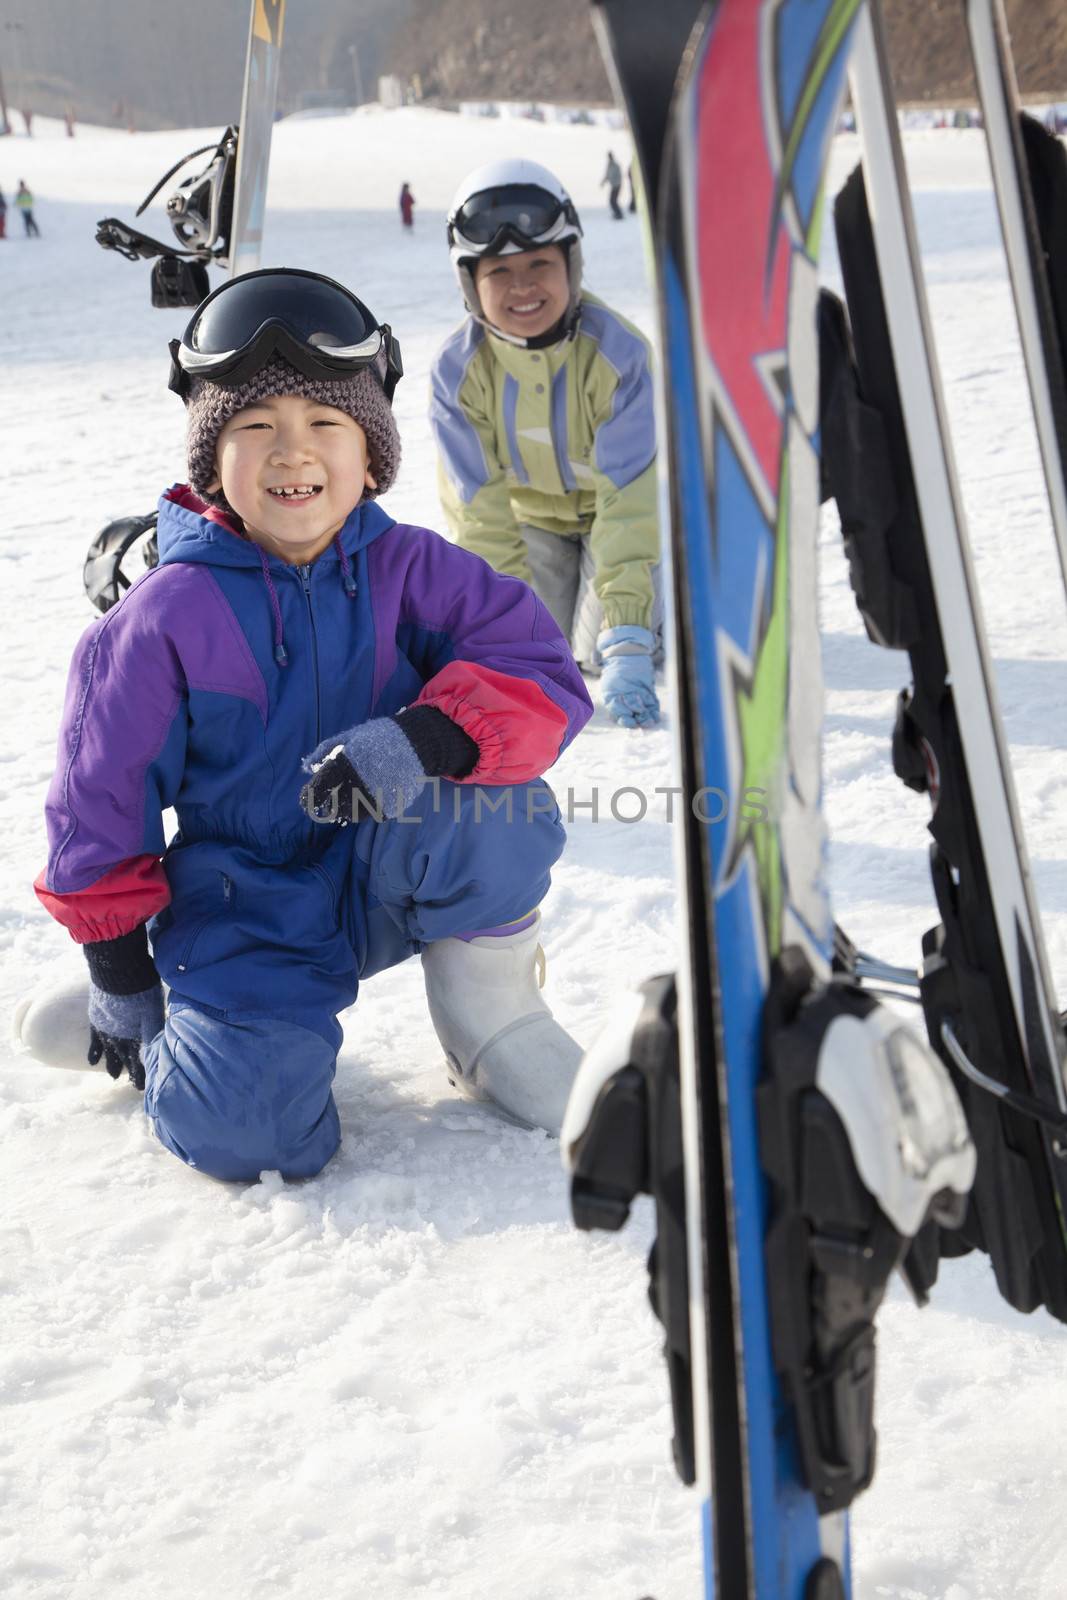 Mother and Son Smiling in Ski Resort by XiXinXing